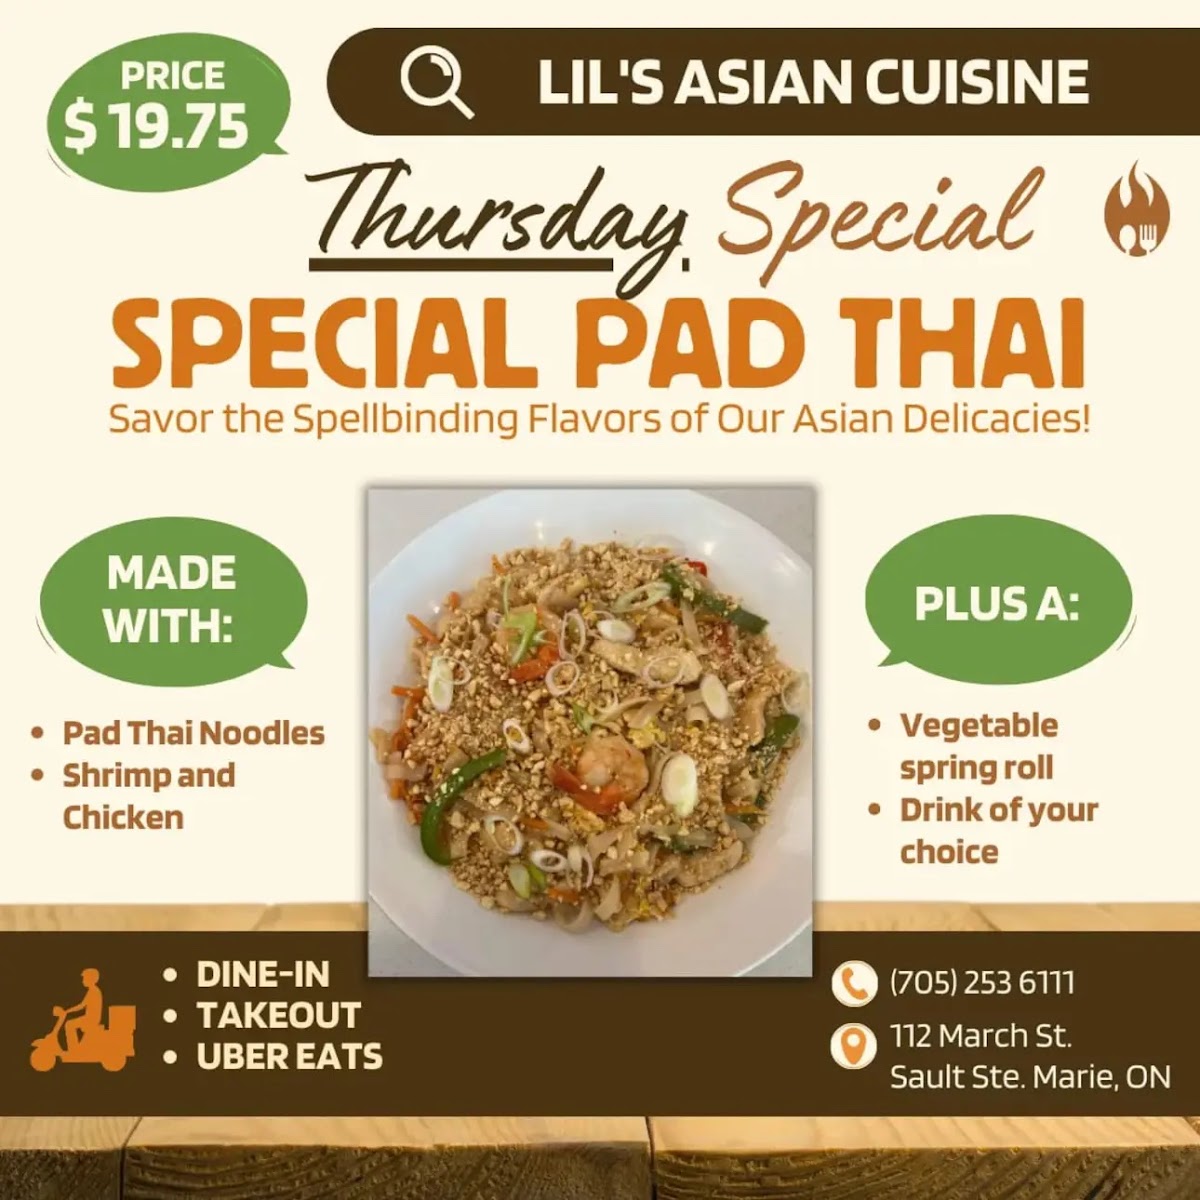 Gluten-Free at Lil's Asian Cuisine